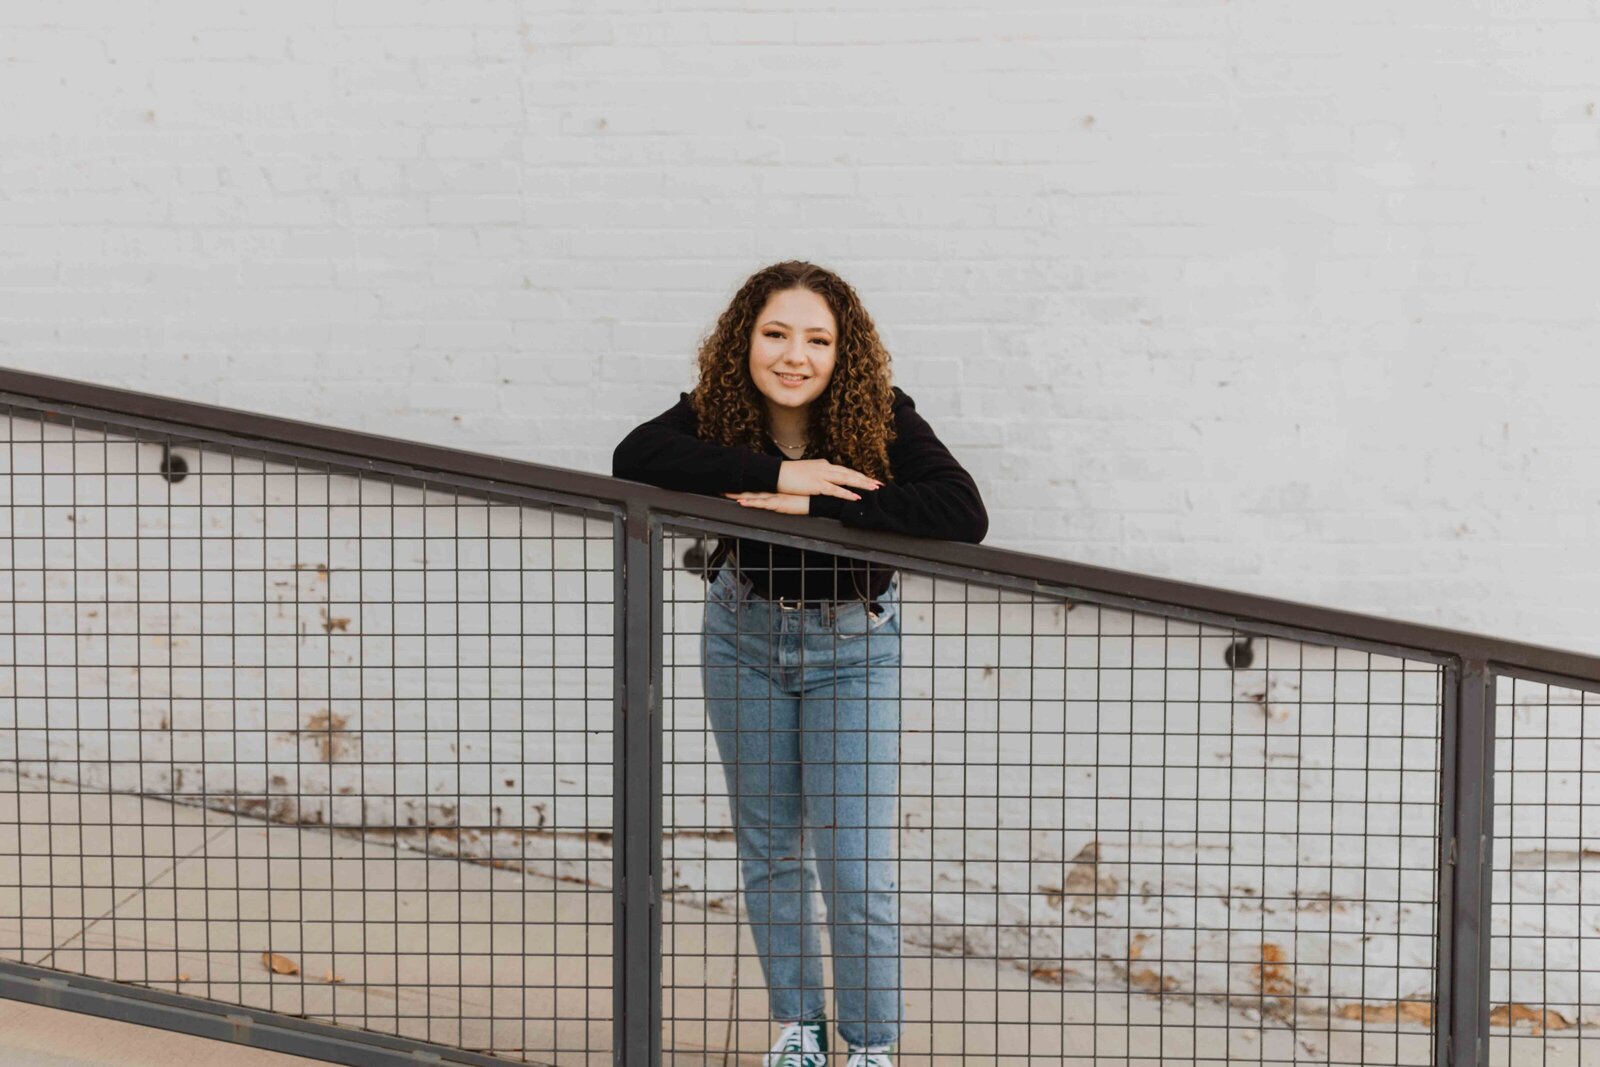 Senior girl standing in front of white wall, leaning on railing with arms rested on it. Smiling and looking at the camera.